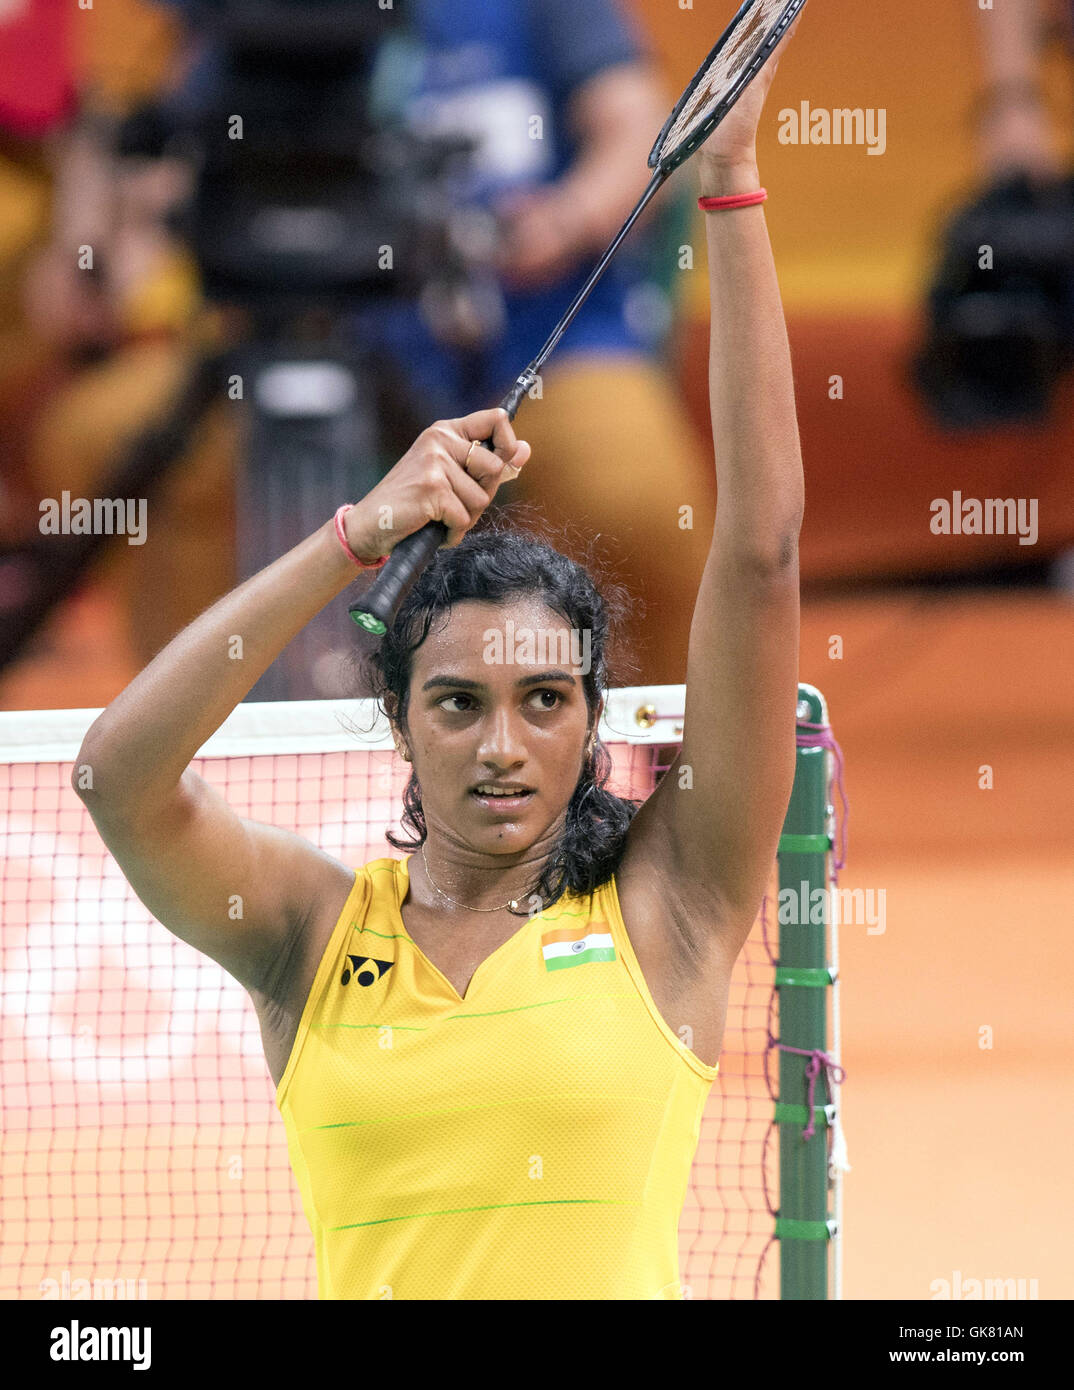 Rio de Janeiro, Brazil. 18th Aug, 2016. Sindhu Pusarla (IND) Badminton : Sindhu  Pusarla of India celebrates after winning the Rio 2016 Olympic Games  Badminton Women's Singles Semi-final match at Riocentro Pavilion